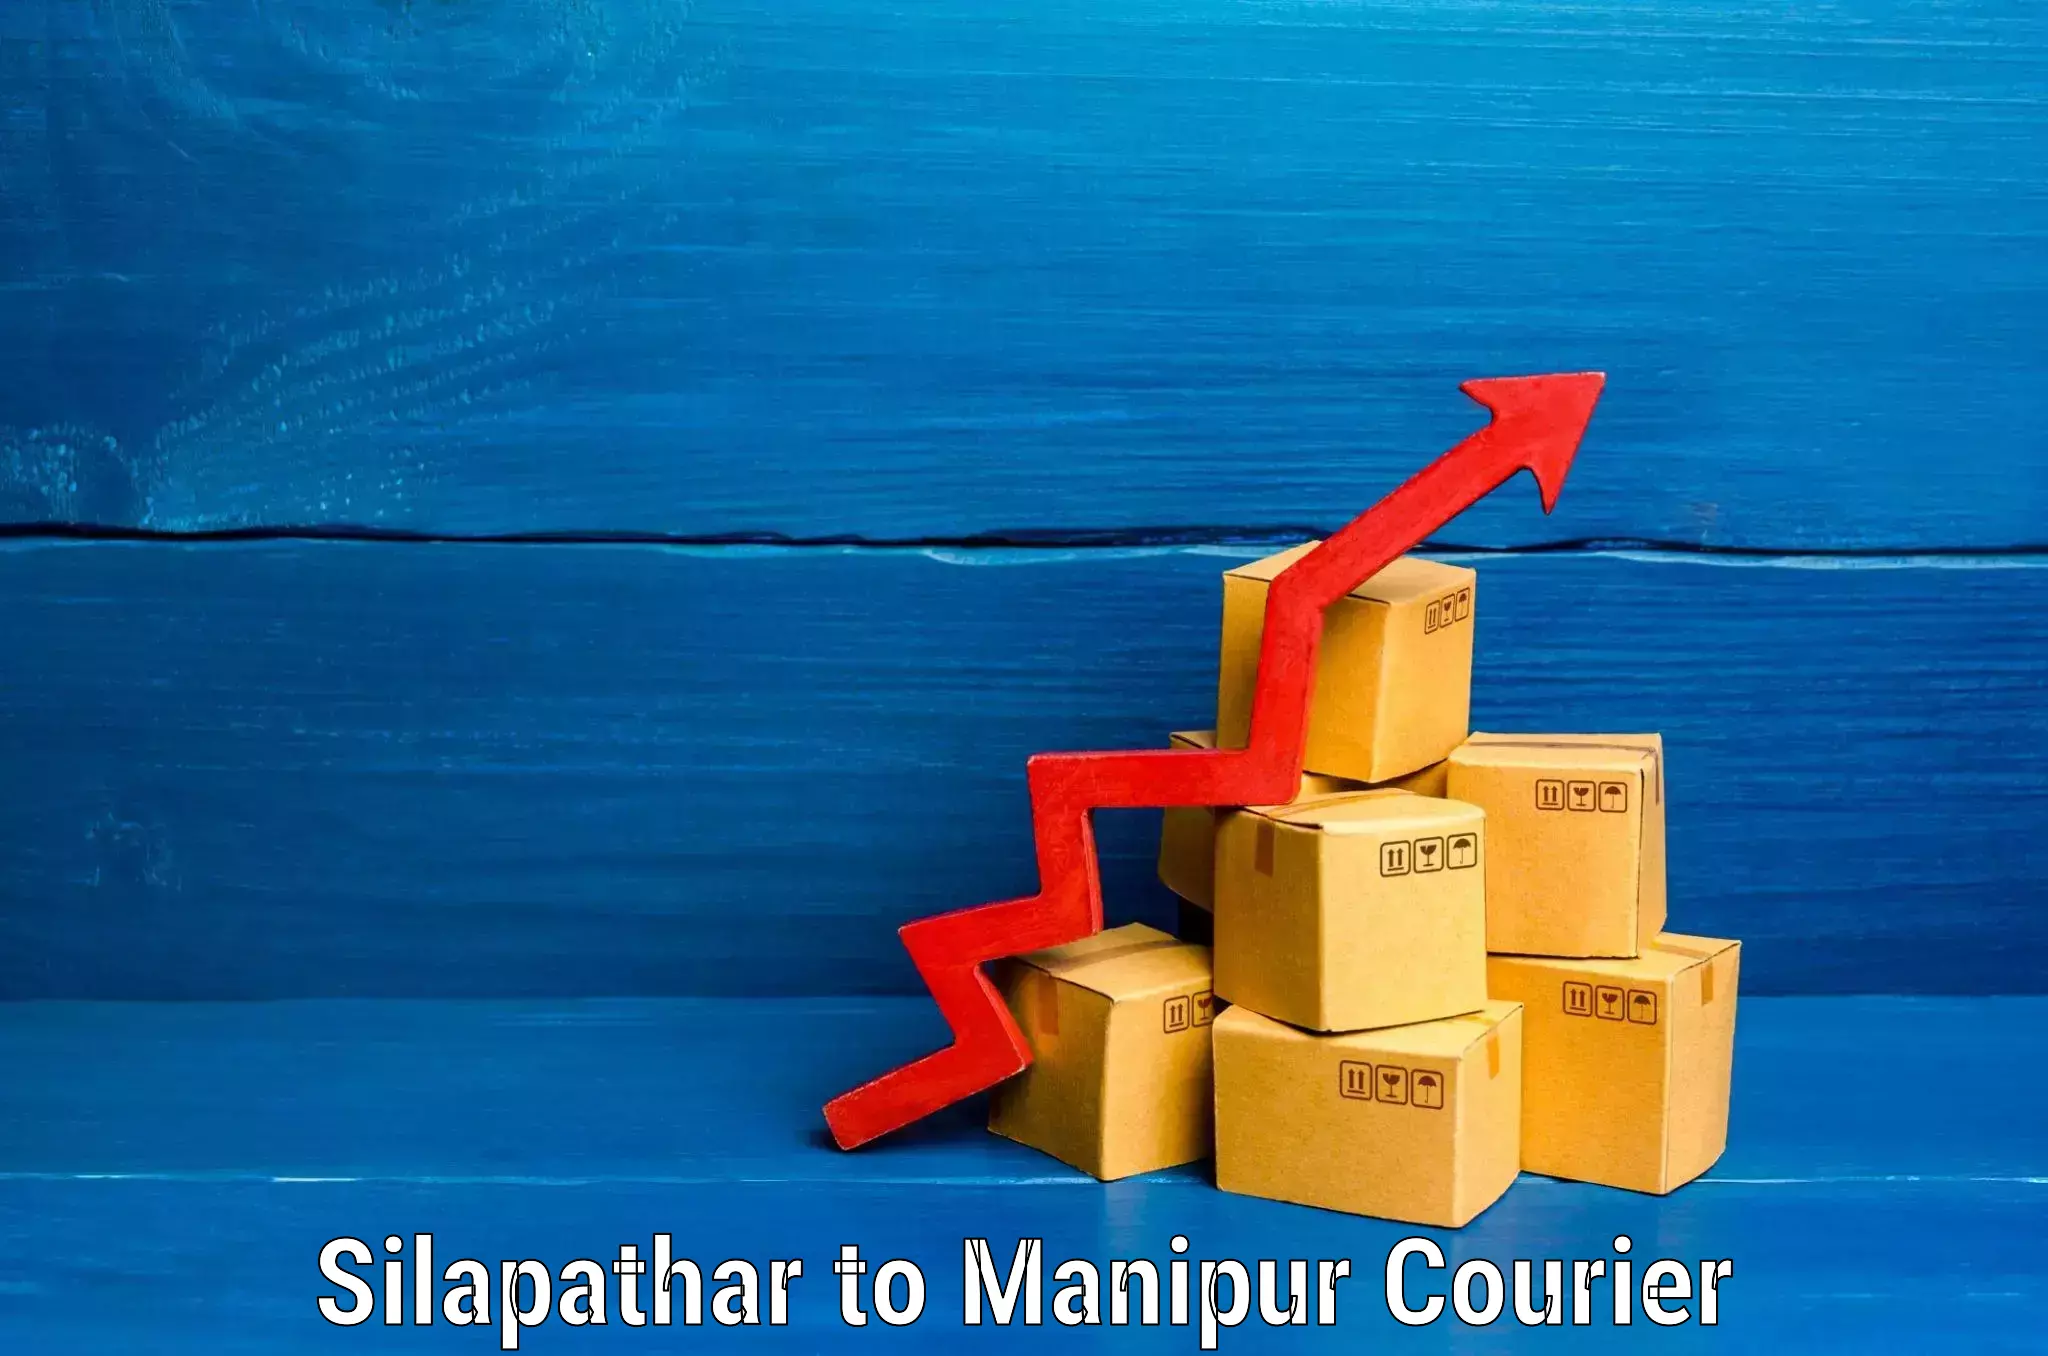 Luggage delivery network Silapathar to Manipur